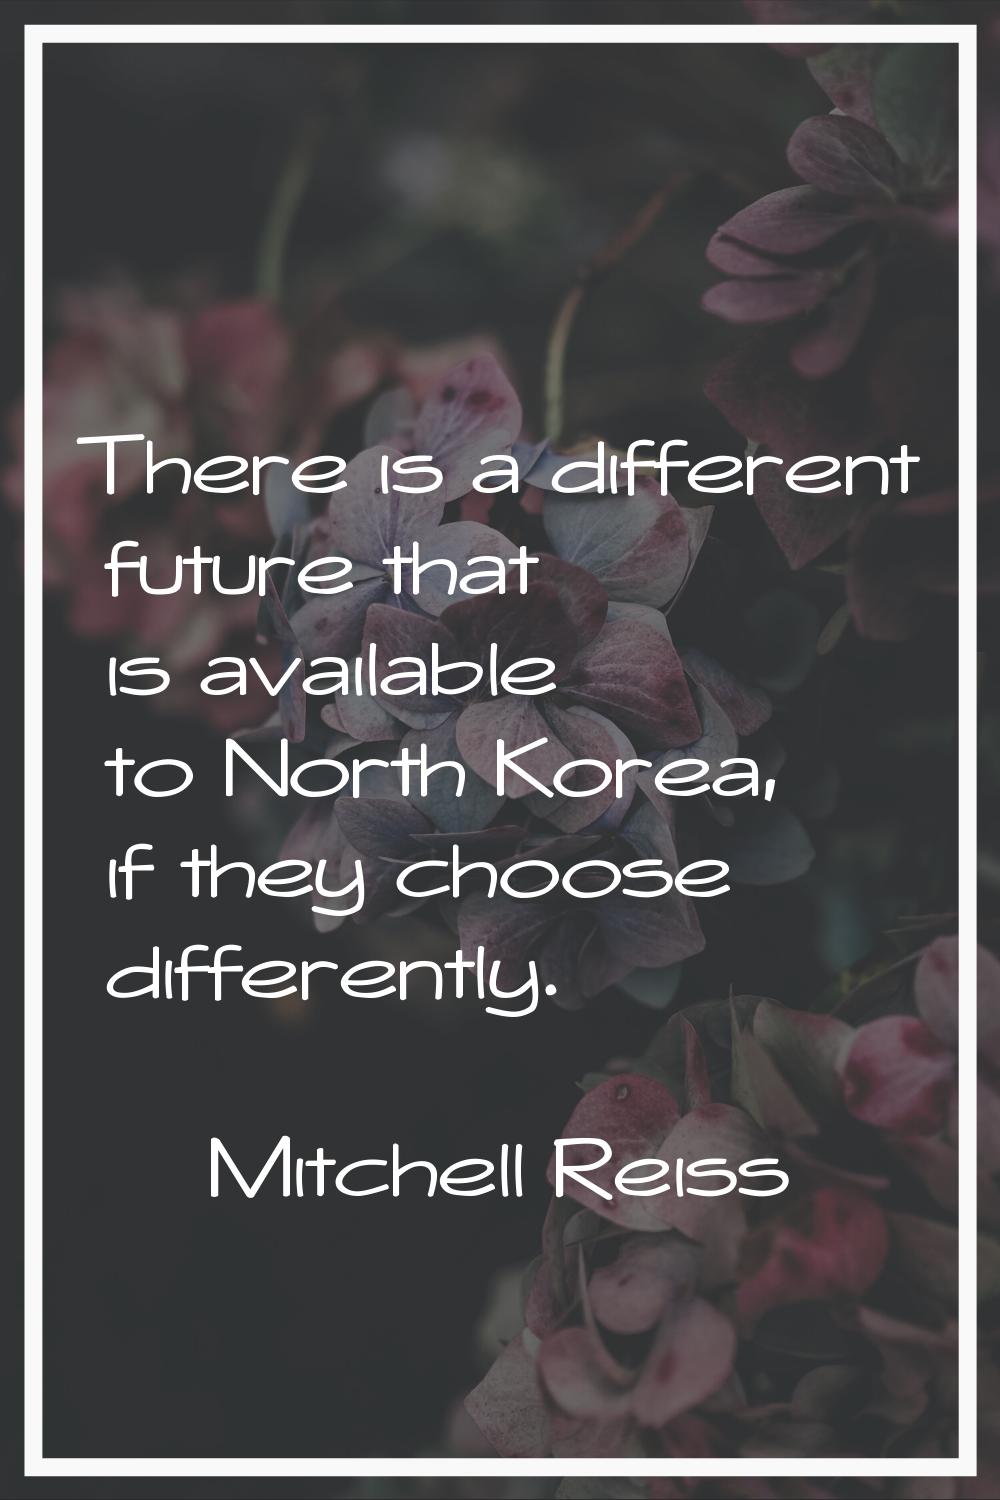 There is a different future that is available to North Korea, if they choose differently.